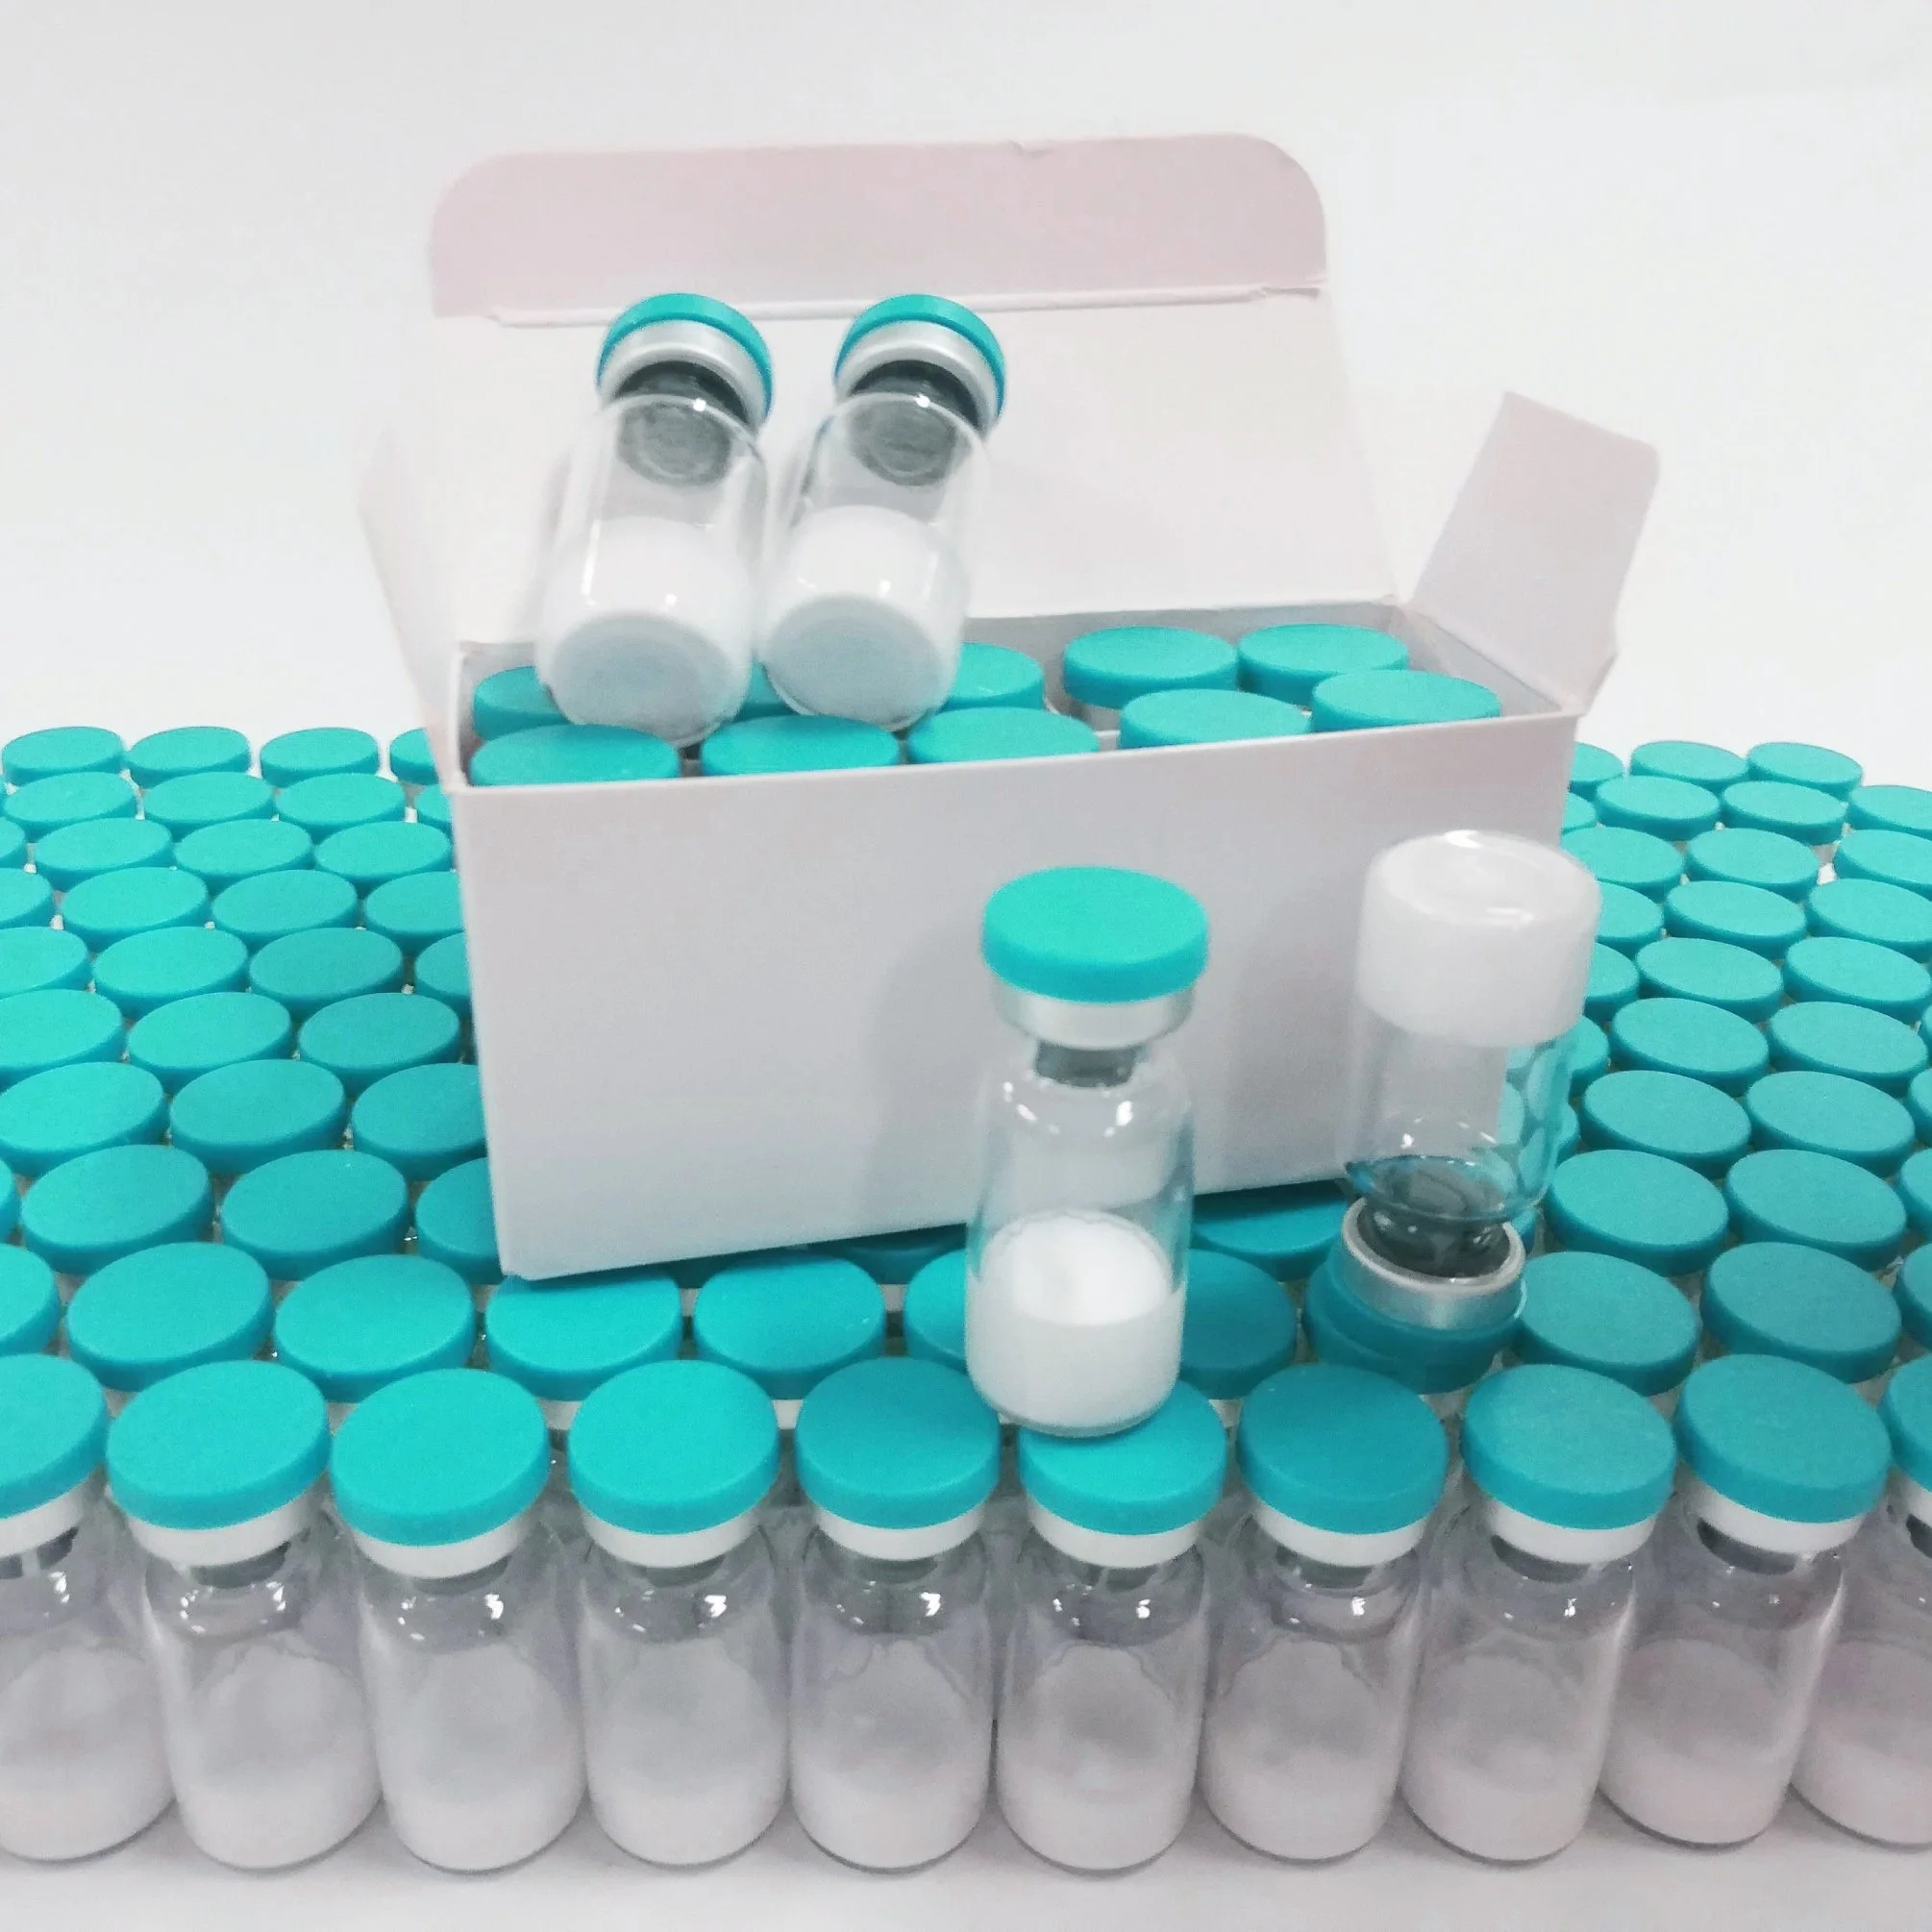 Ipamorelin-Releasing-Peptides-170851-70-4-Ipamorelin-Injection-Factory-Price.webp